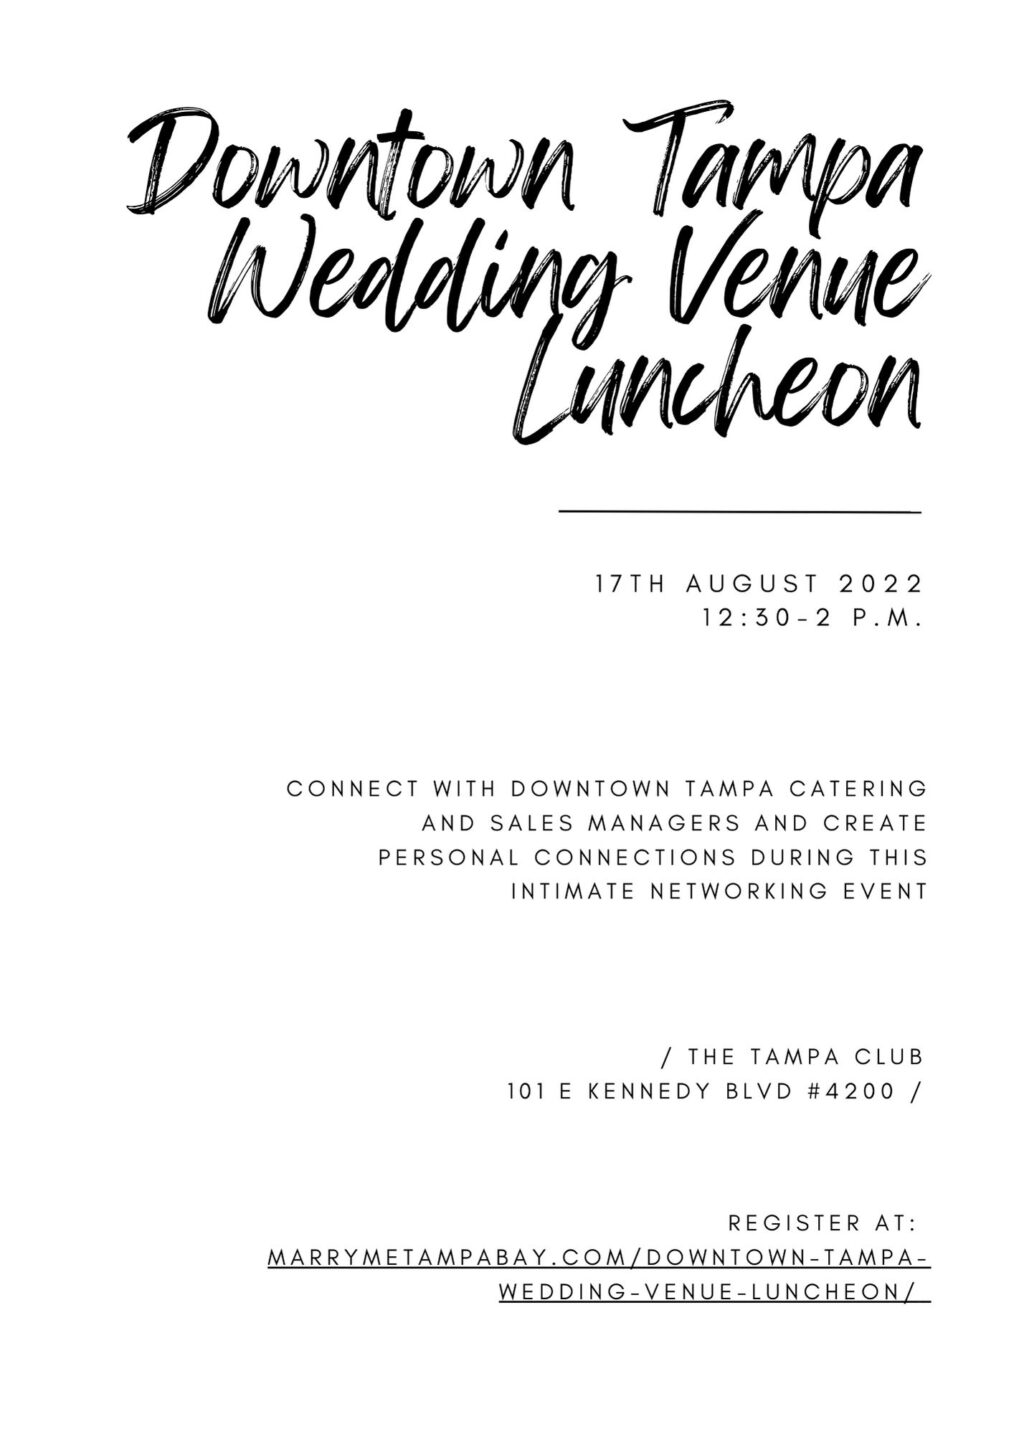 Downtown Tampa Wedding Venue Luncheon